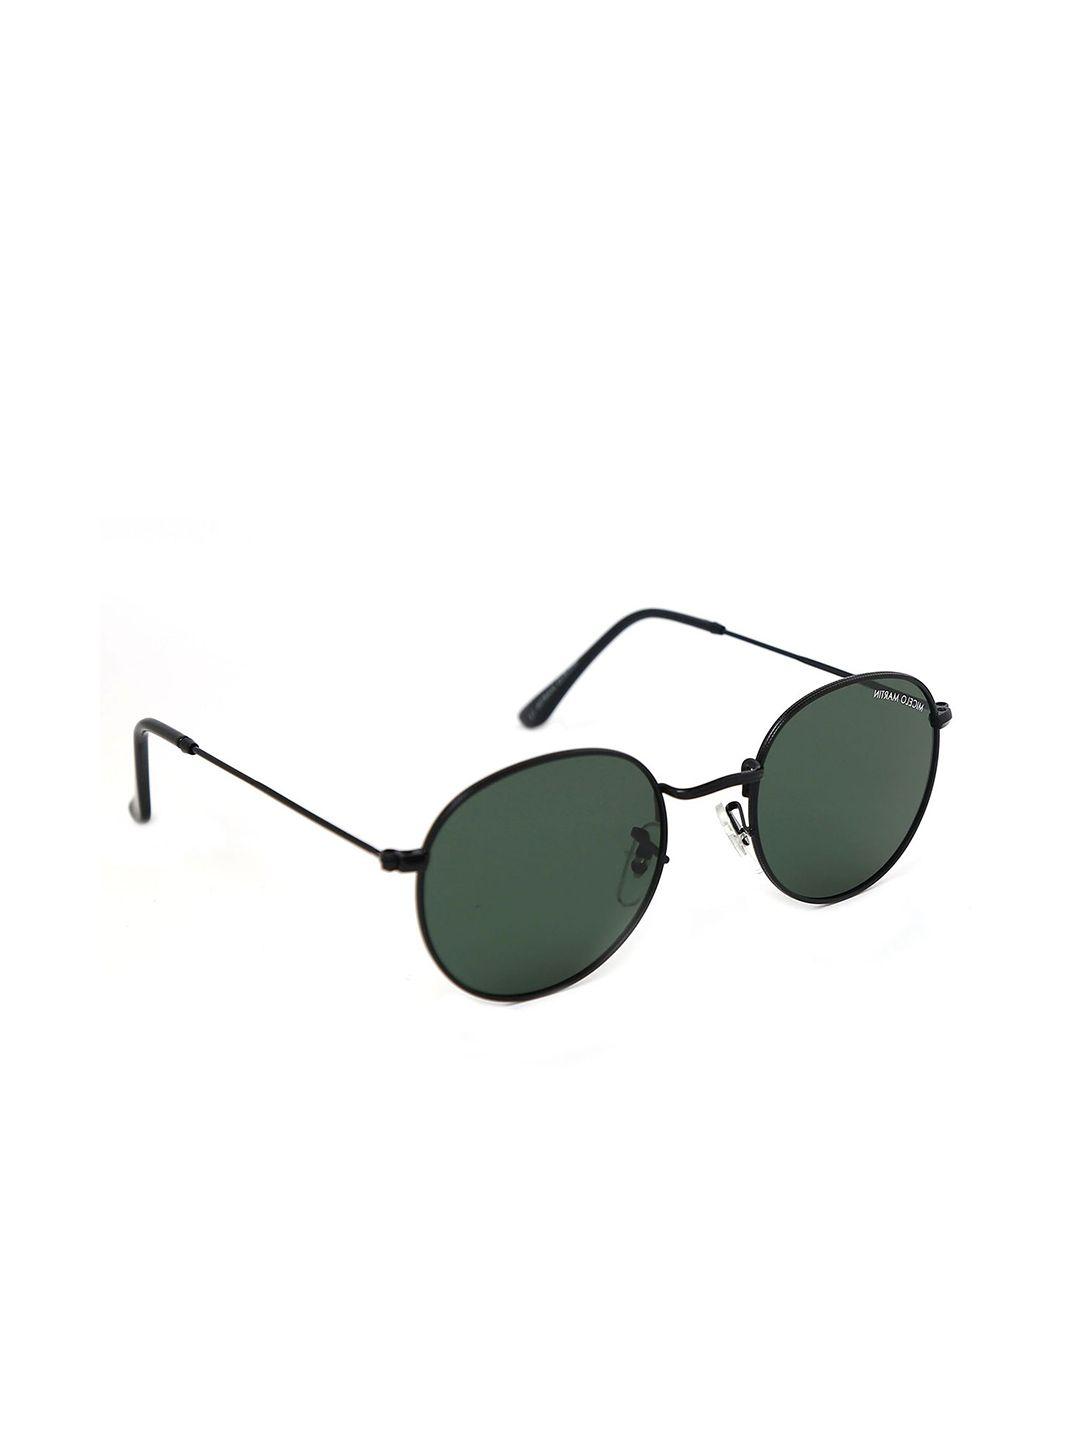 micelo martin unisex green lens & black round sunglasses with uv protected lens mm1004 c2